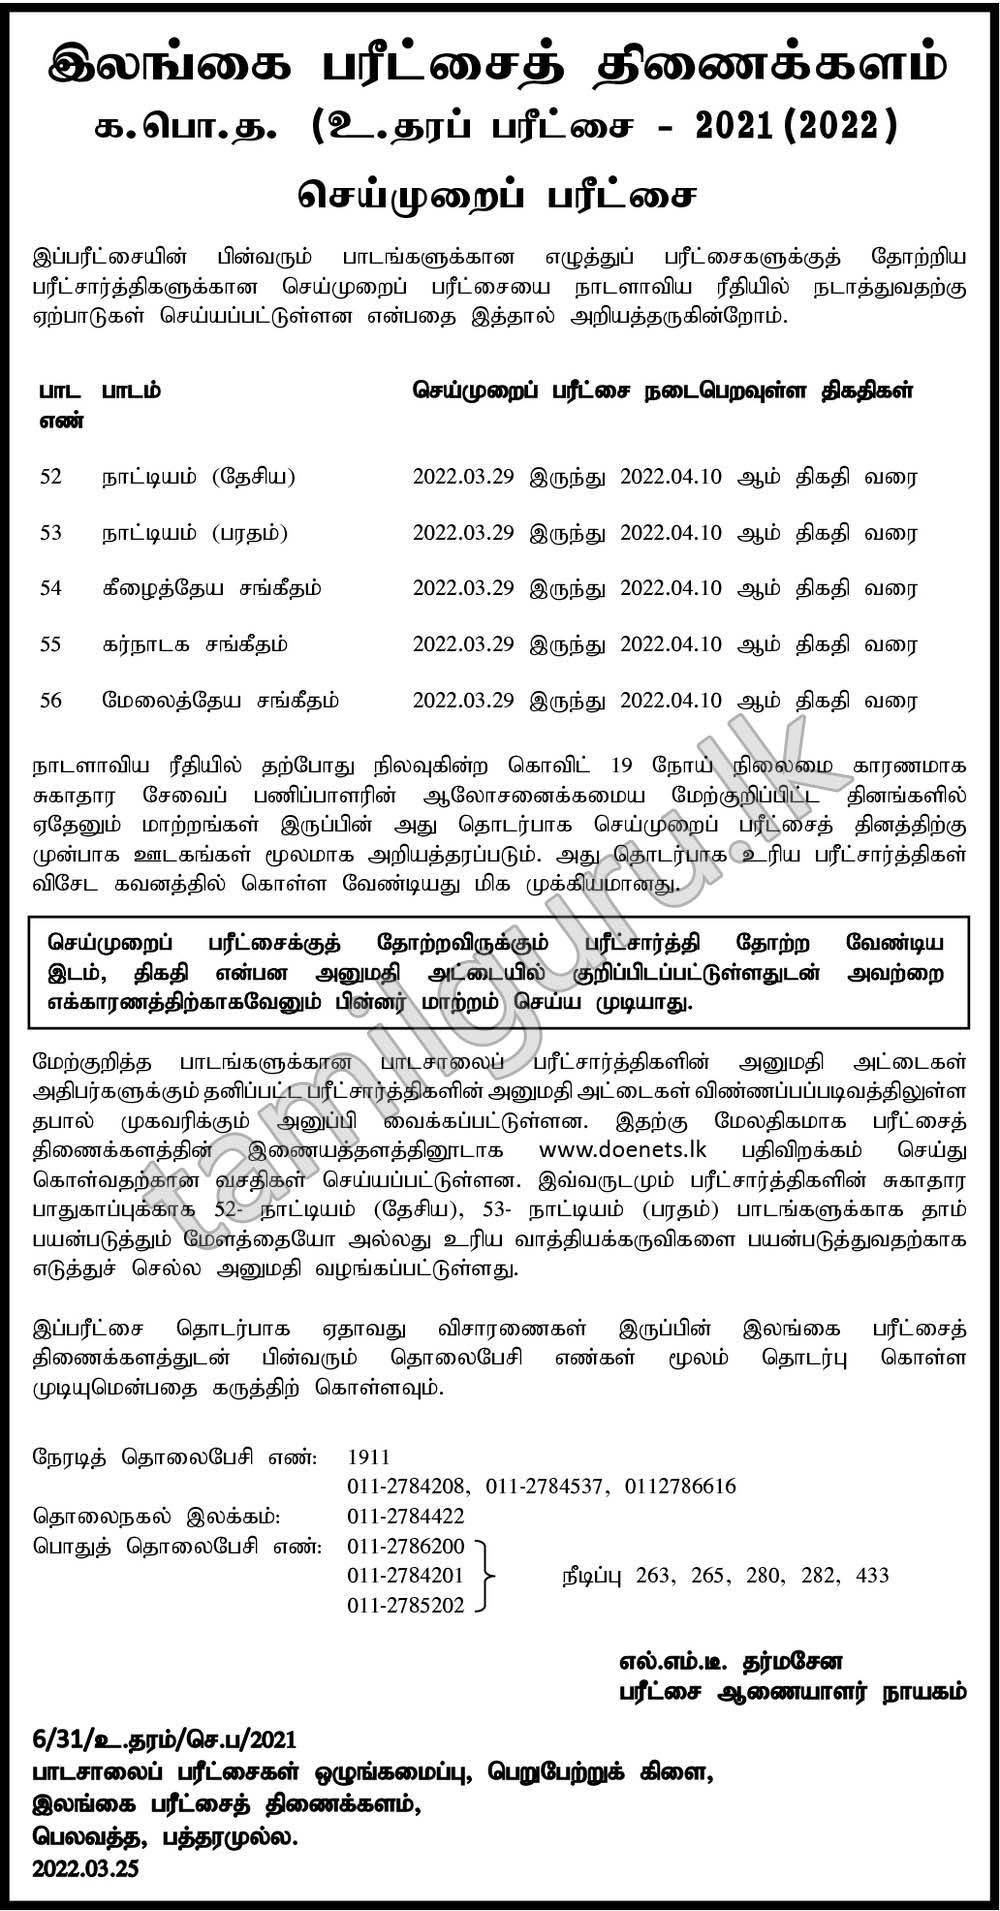 Exam Dates & Admission Card for GCE A/L Examination 2021 (2022) - Practical Test (Notice in Tamil)